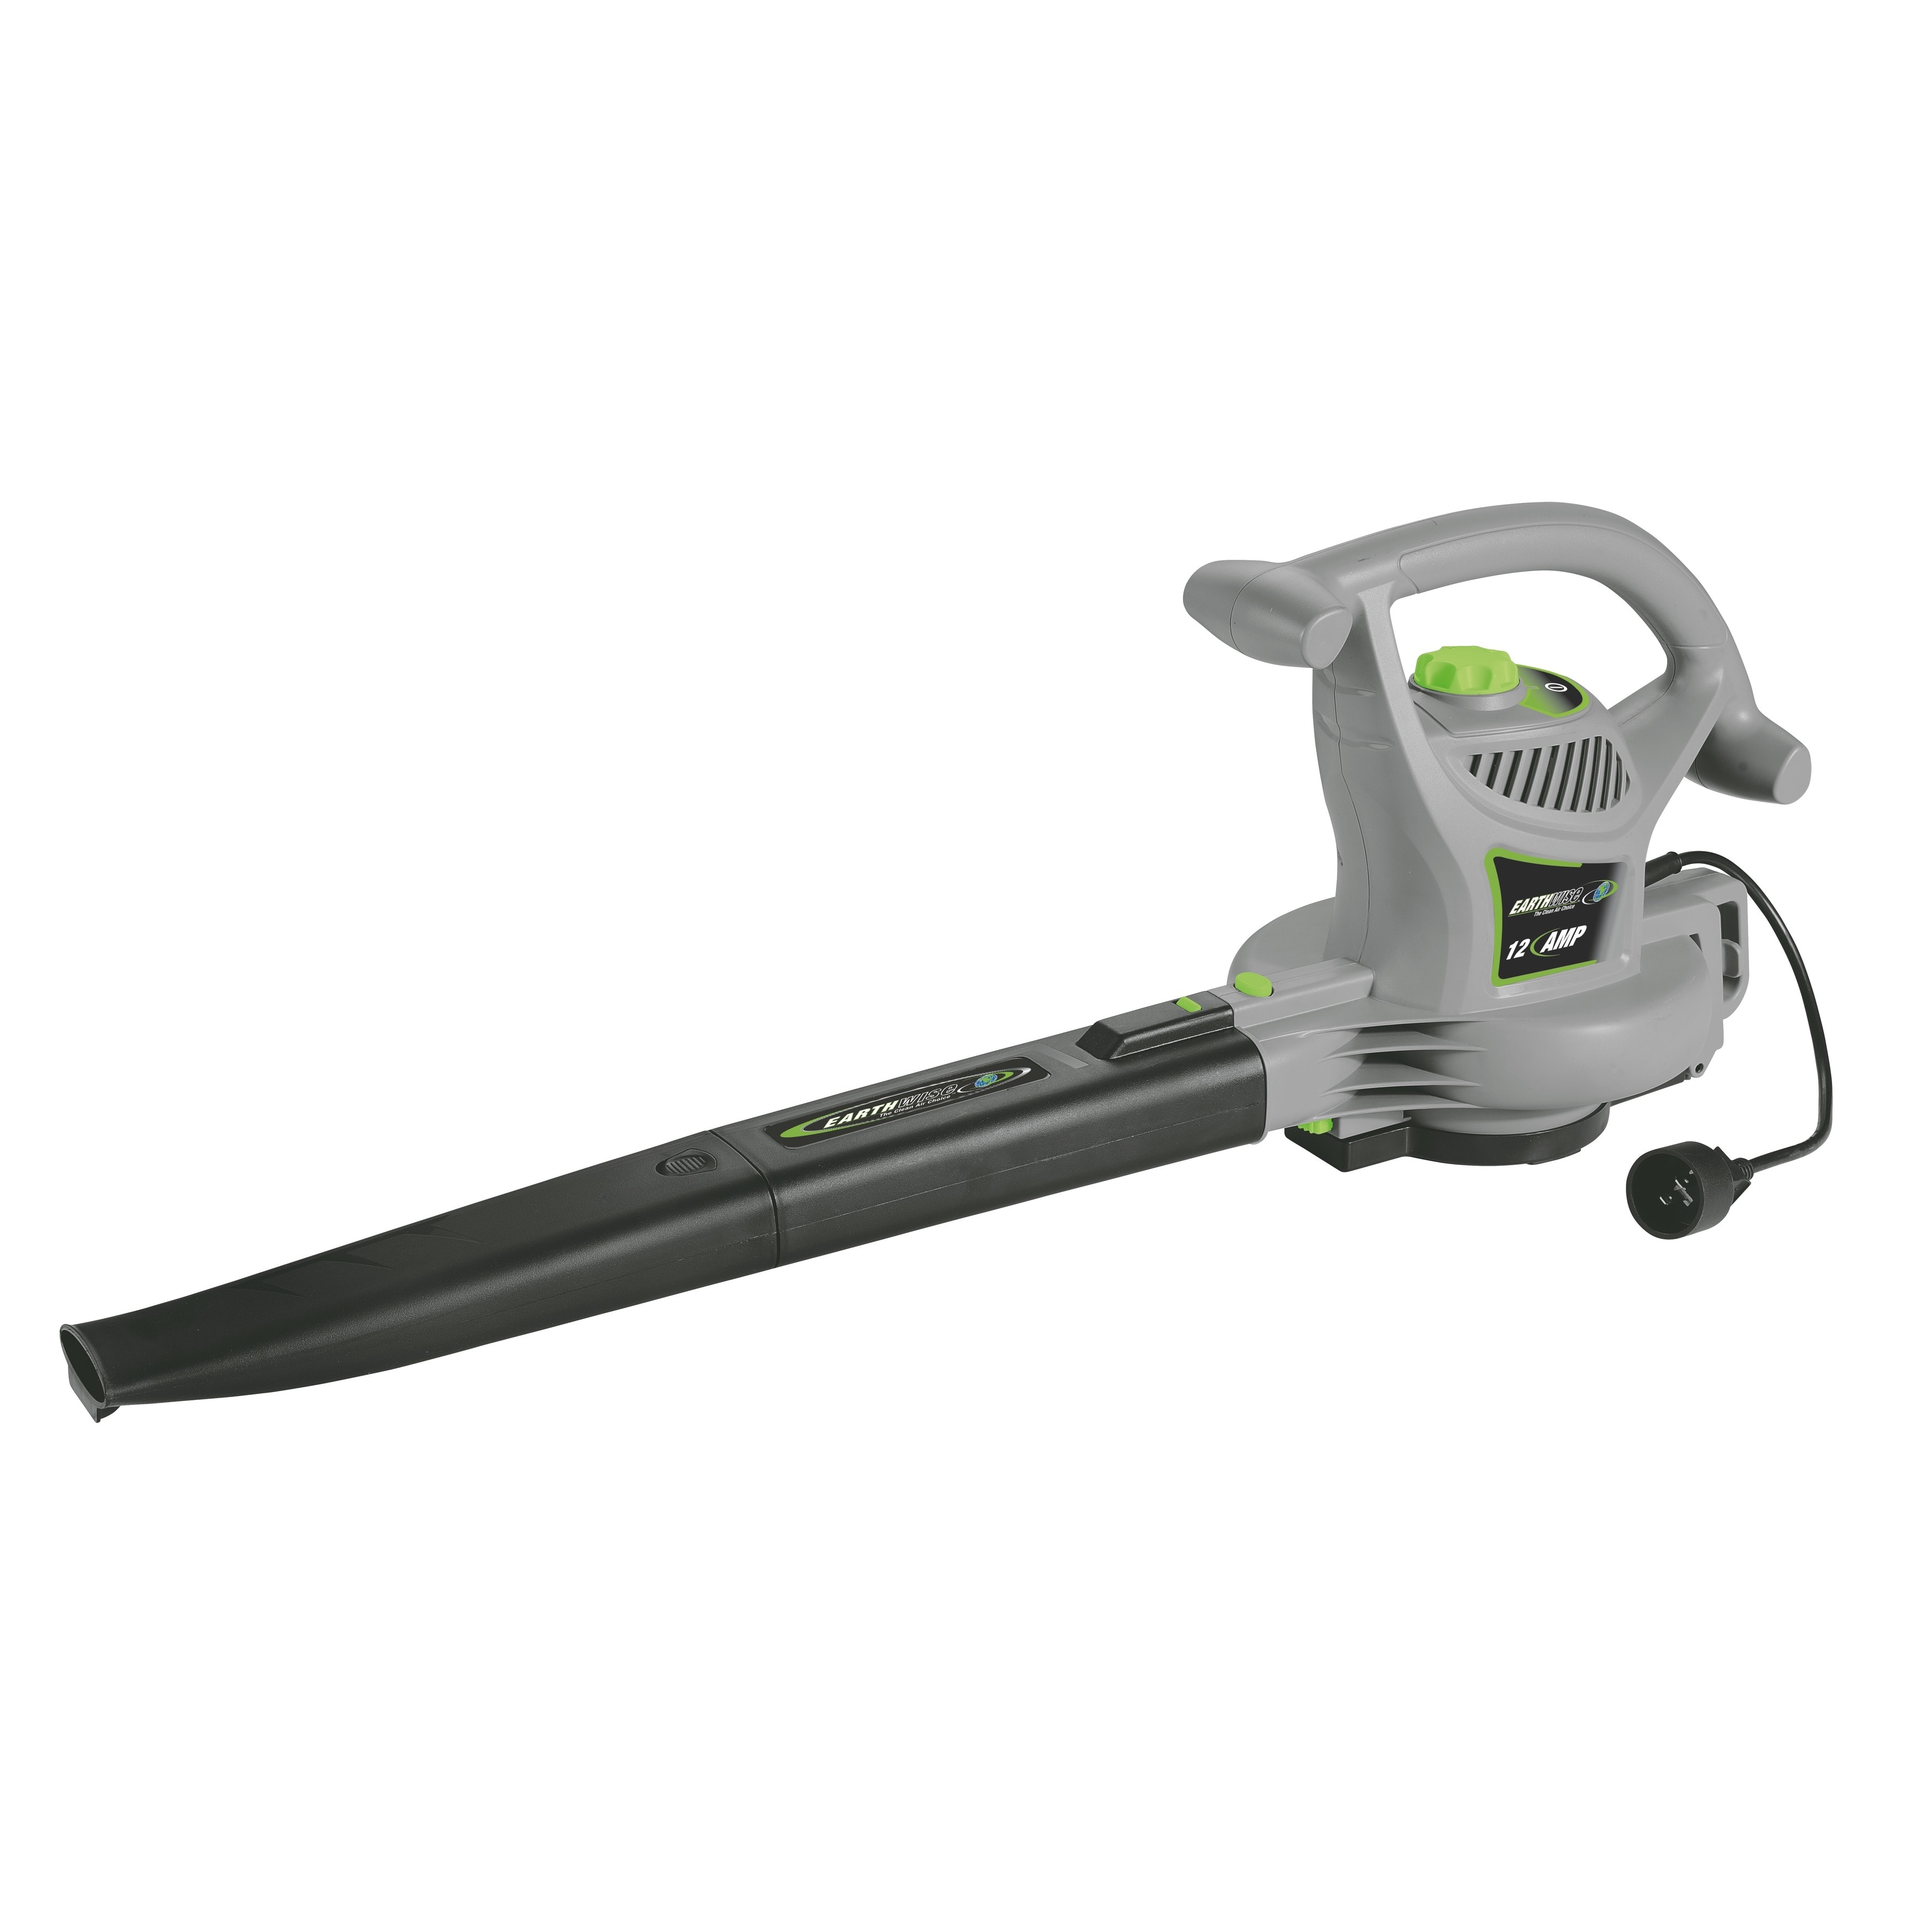 Earthwise BVM22012 12 Amp Corded Electric 3-in-1 Blower, Vacuum, Mulcher - image 3 of 8